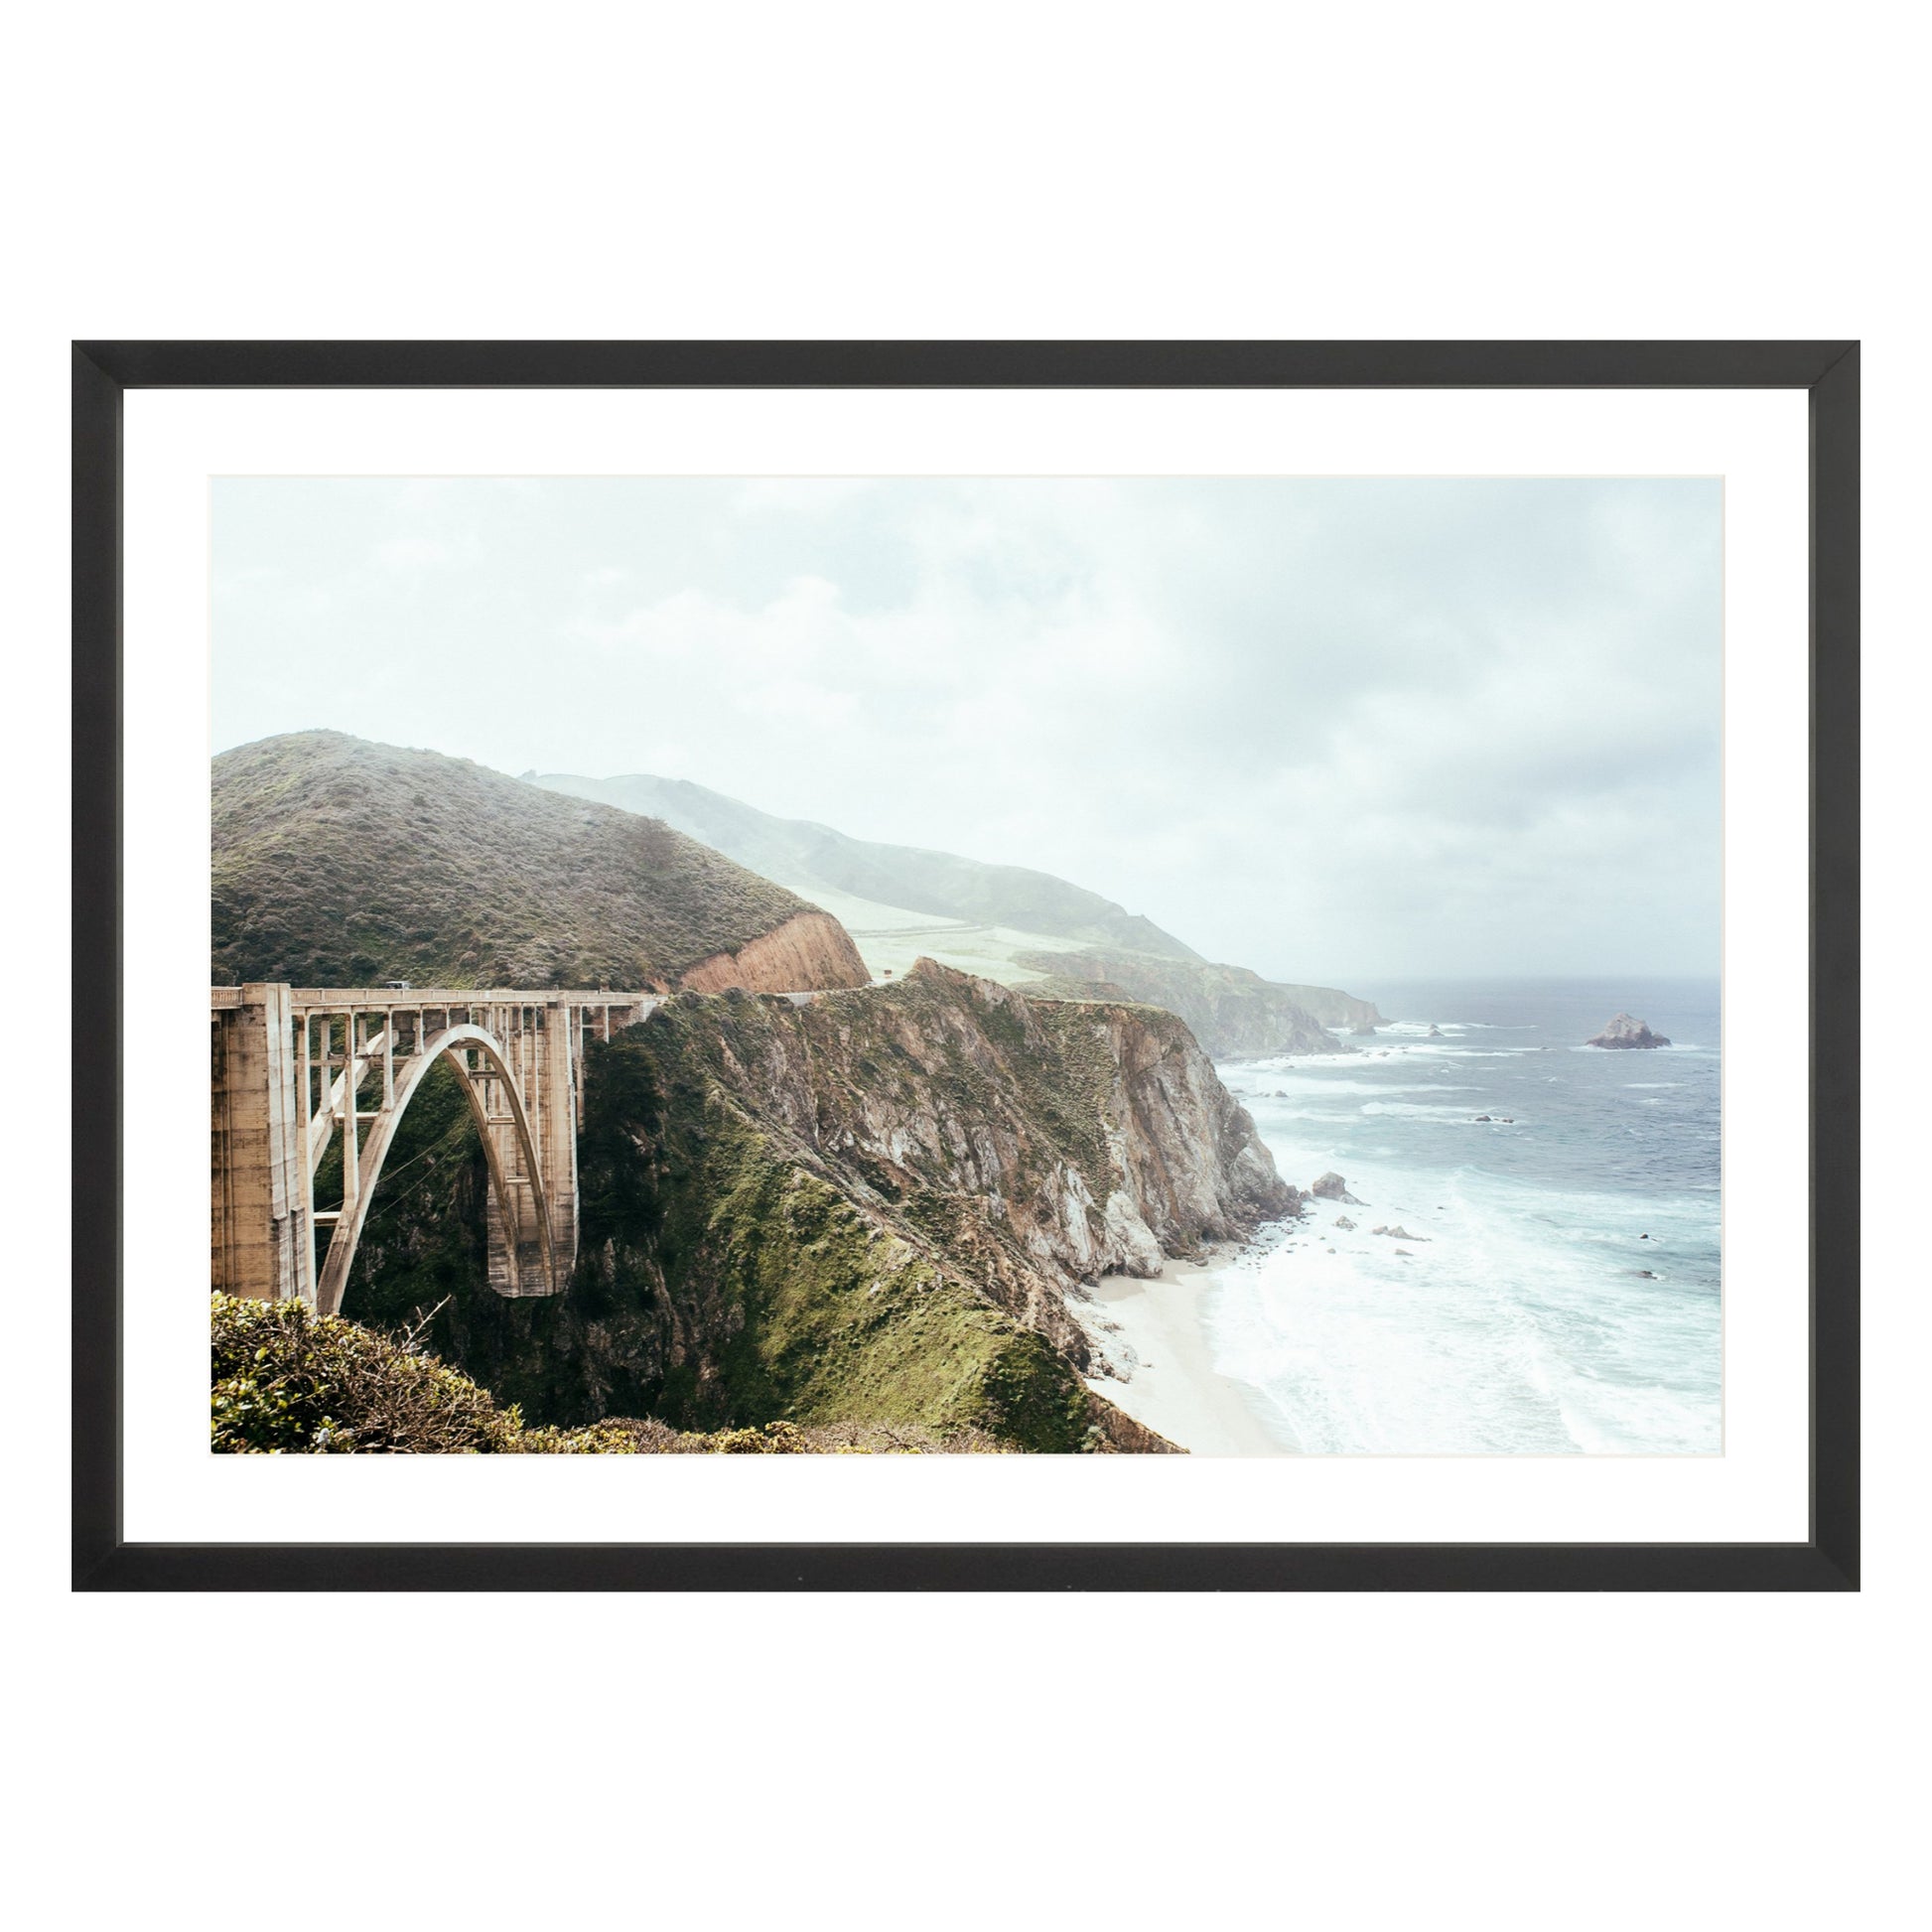 Photograph of Bixby Bridge in Big Sur California framed in black with white mat